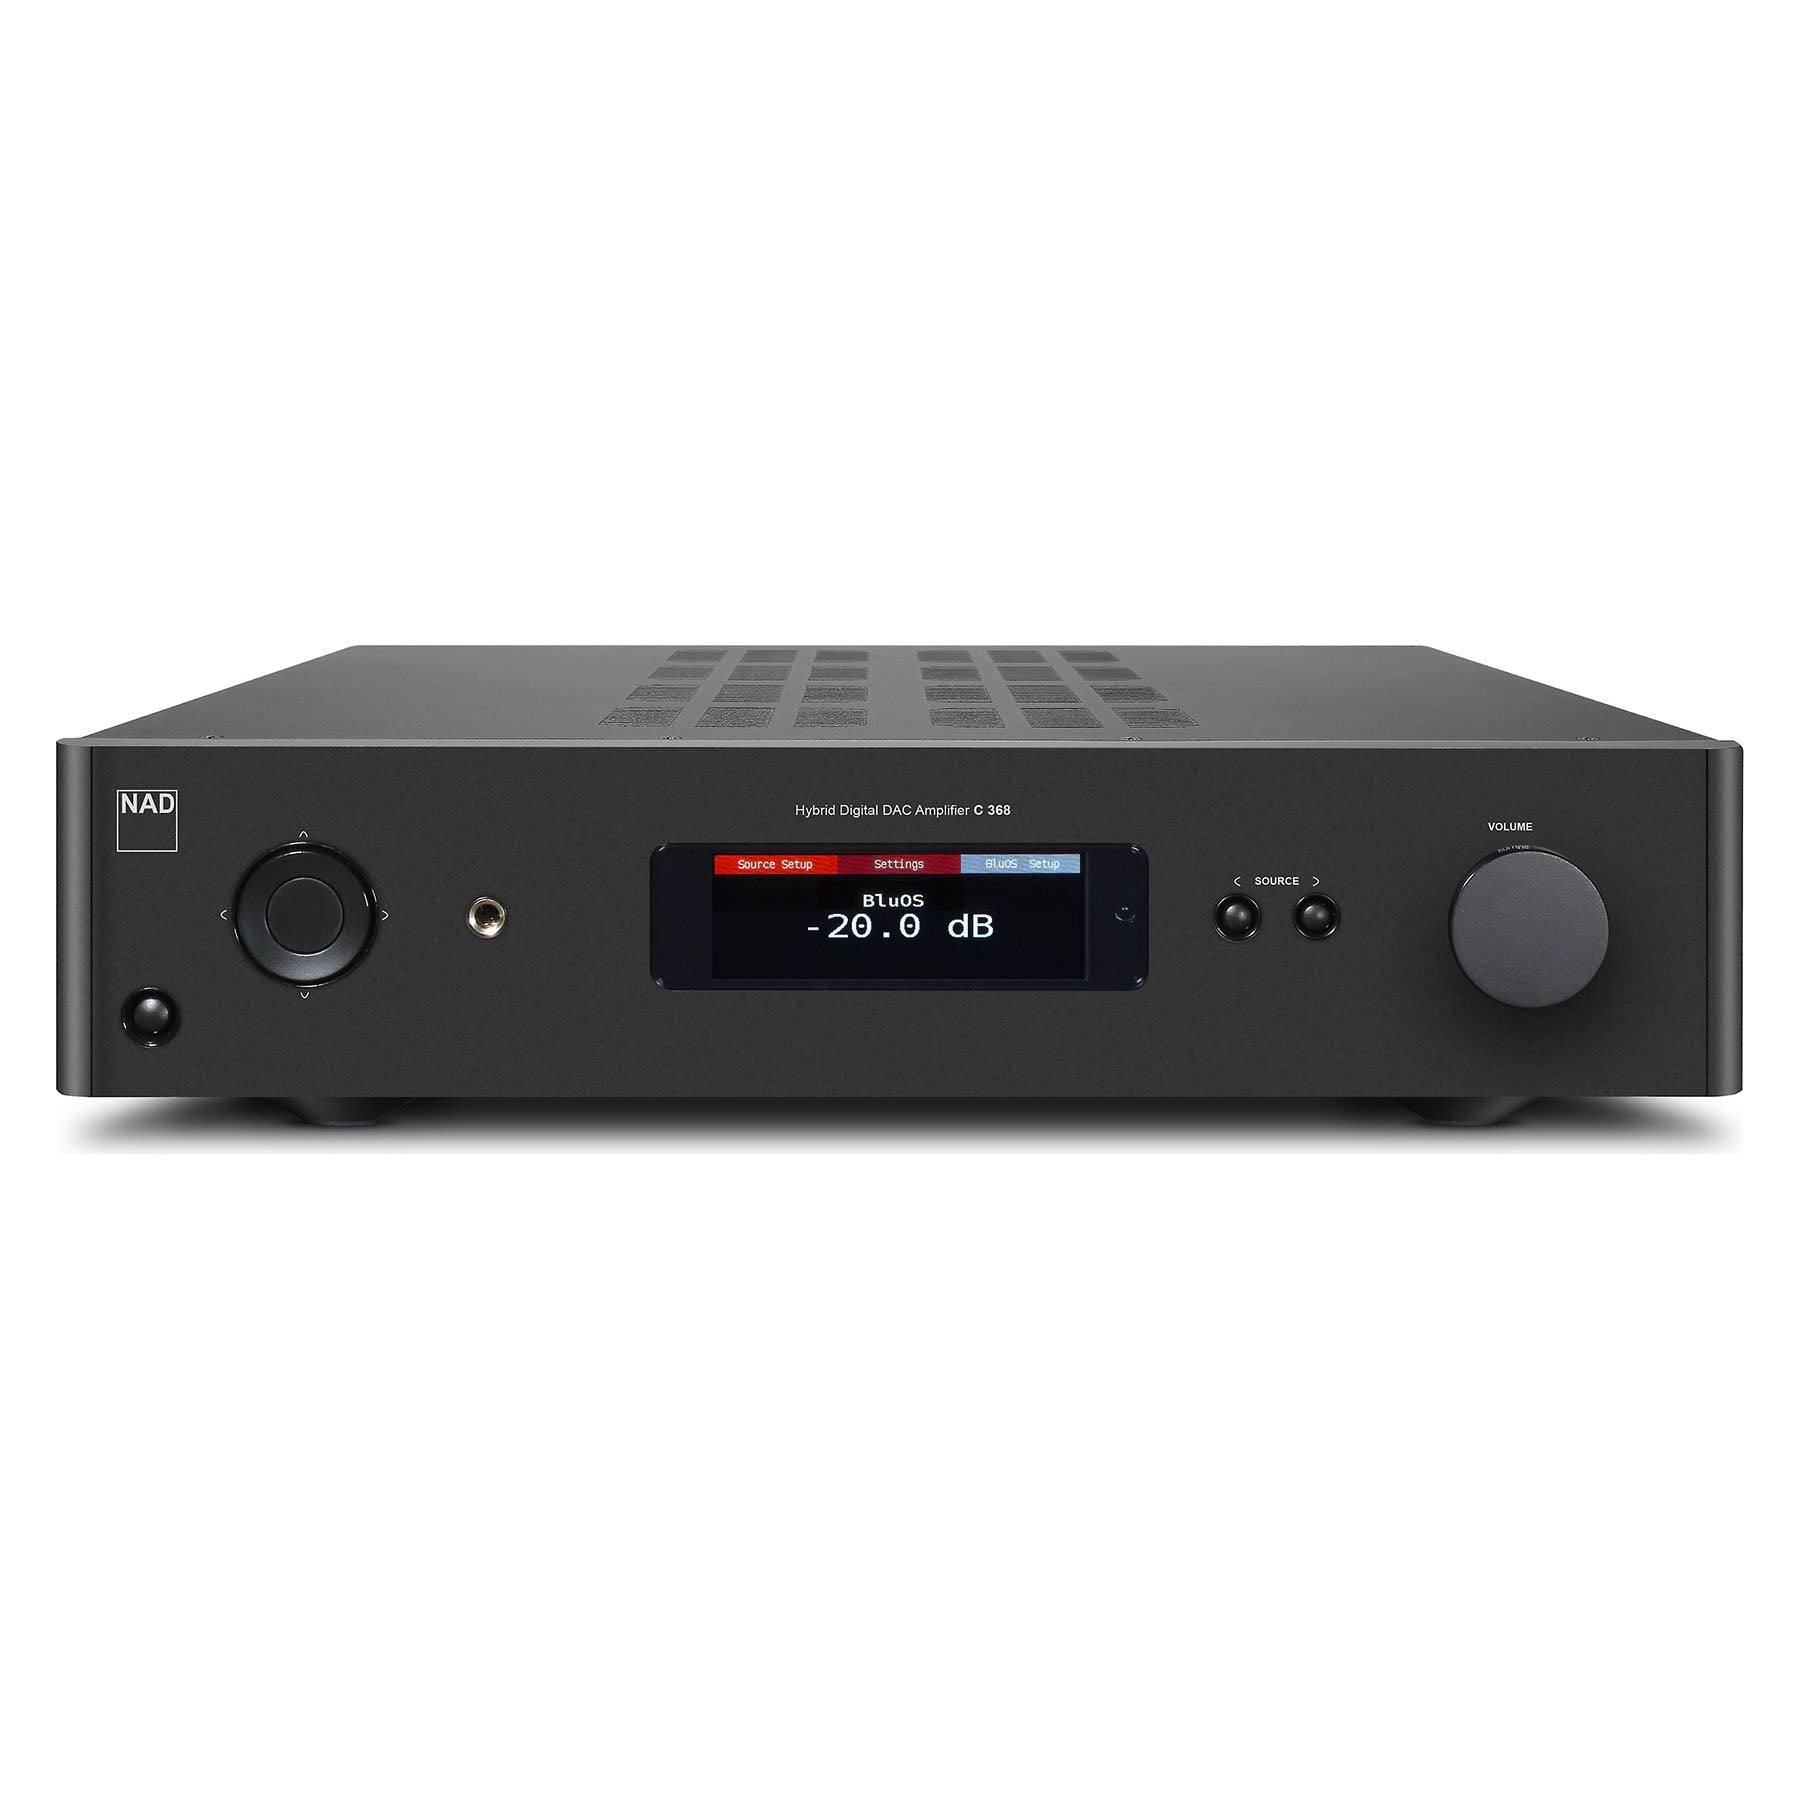 NAD C 368 Integrated Amplifier with BLU-OS installed